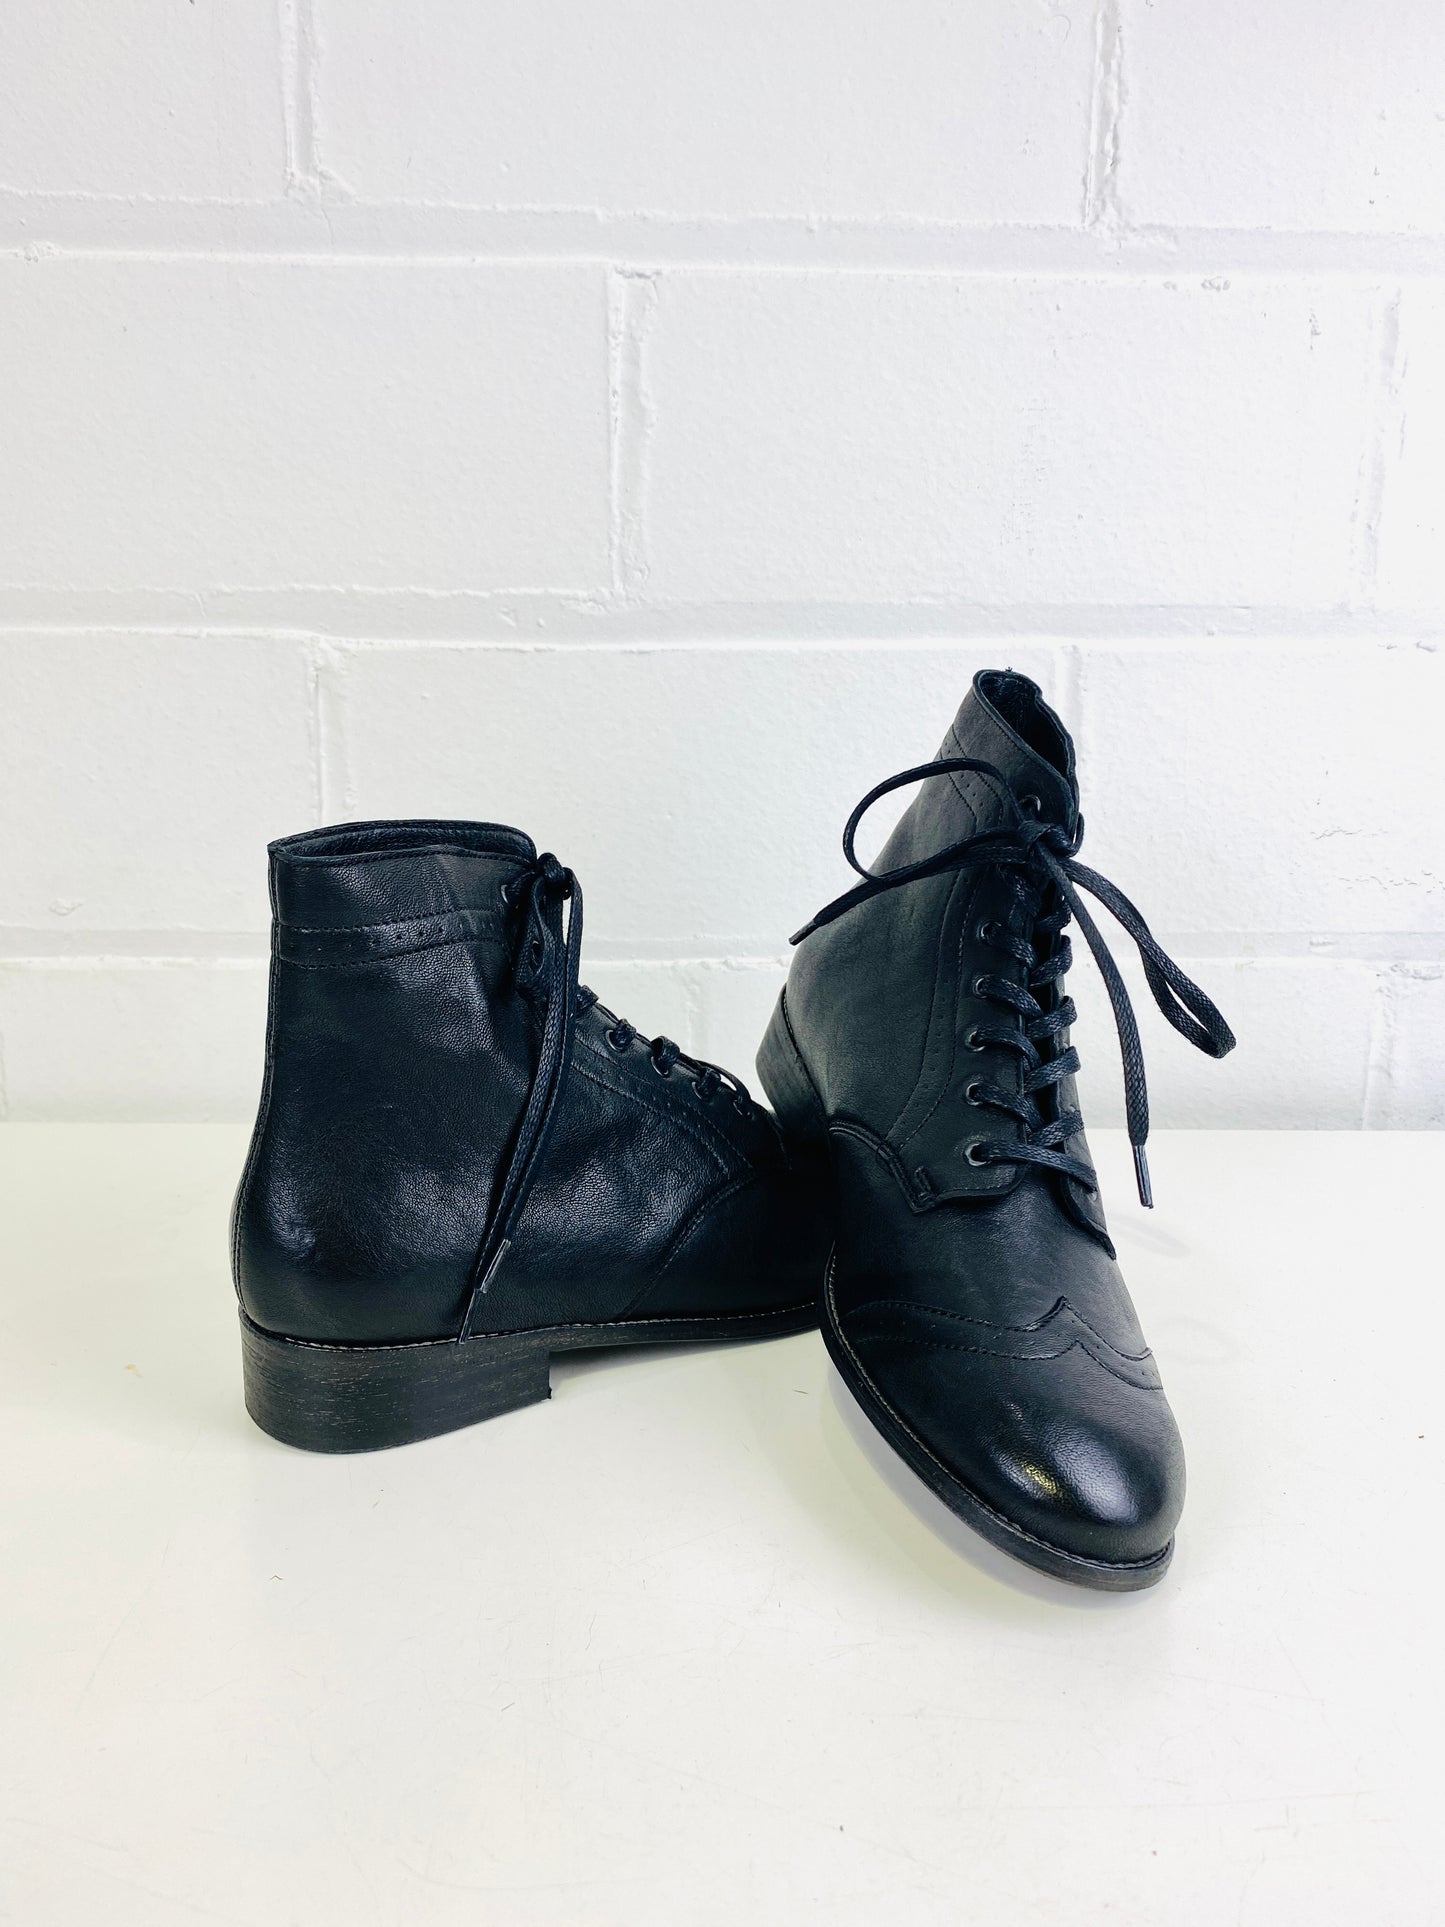 Boys' Period Repro Black Leather Wingtip Brogue Boots, Made in Portugal